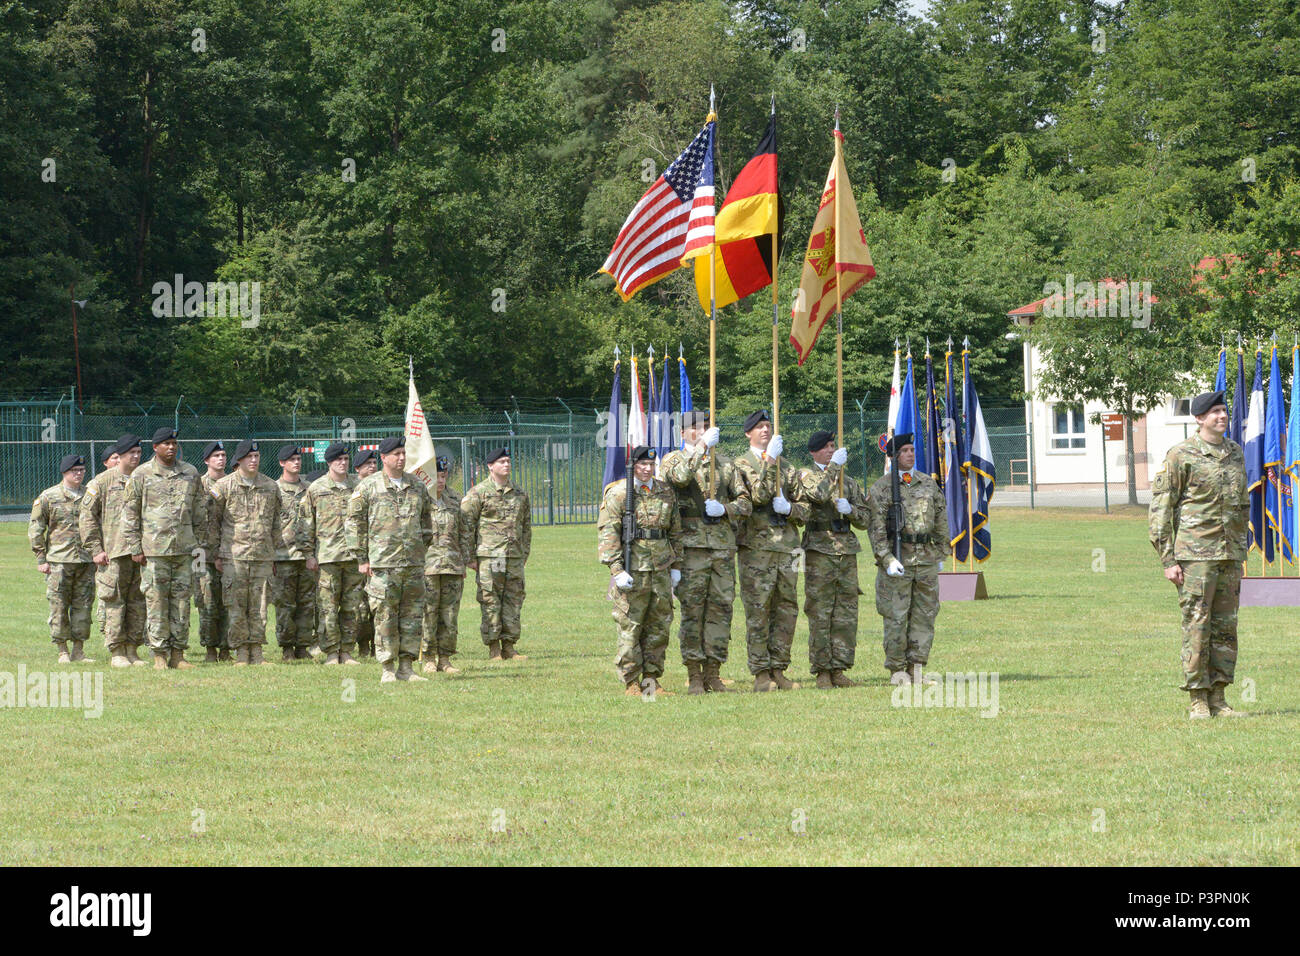 ANSBACH, Germany (July 21, 2016) – At the U.S. Army Garrison Ansbach change of command ceremony, Col. Benjamin C. Jones, right, incoming garrison commander, stands at the head of the color guard formation Monday at Barton Barracks here. Stock Photo